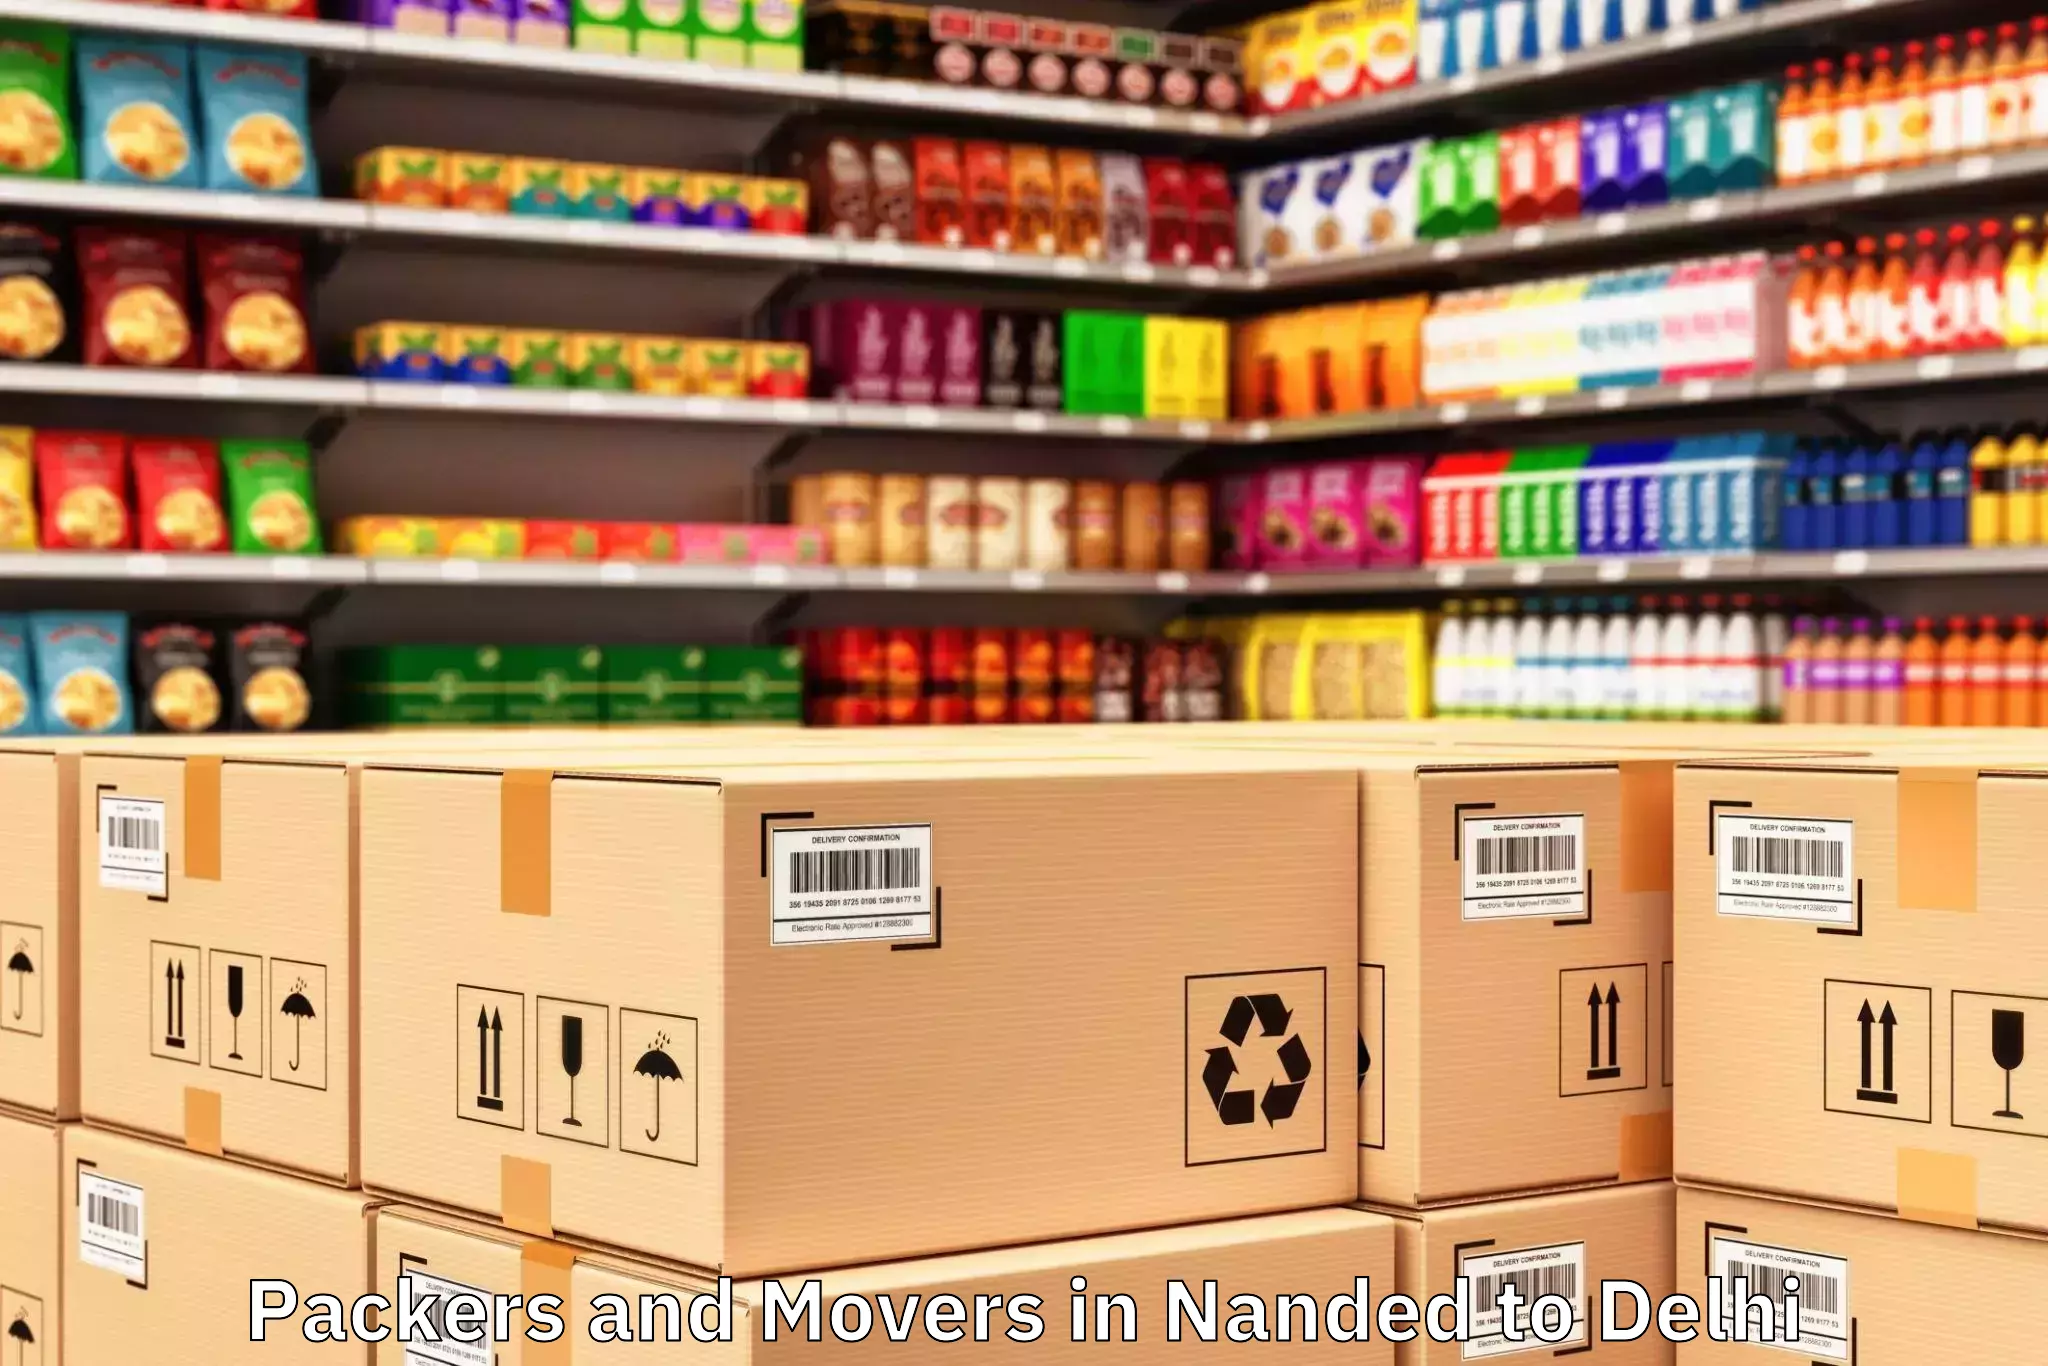 Professional Nanded to Functional Industrial Estate For Electronics Packers And Movers